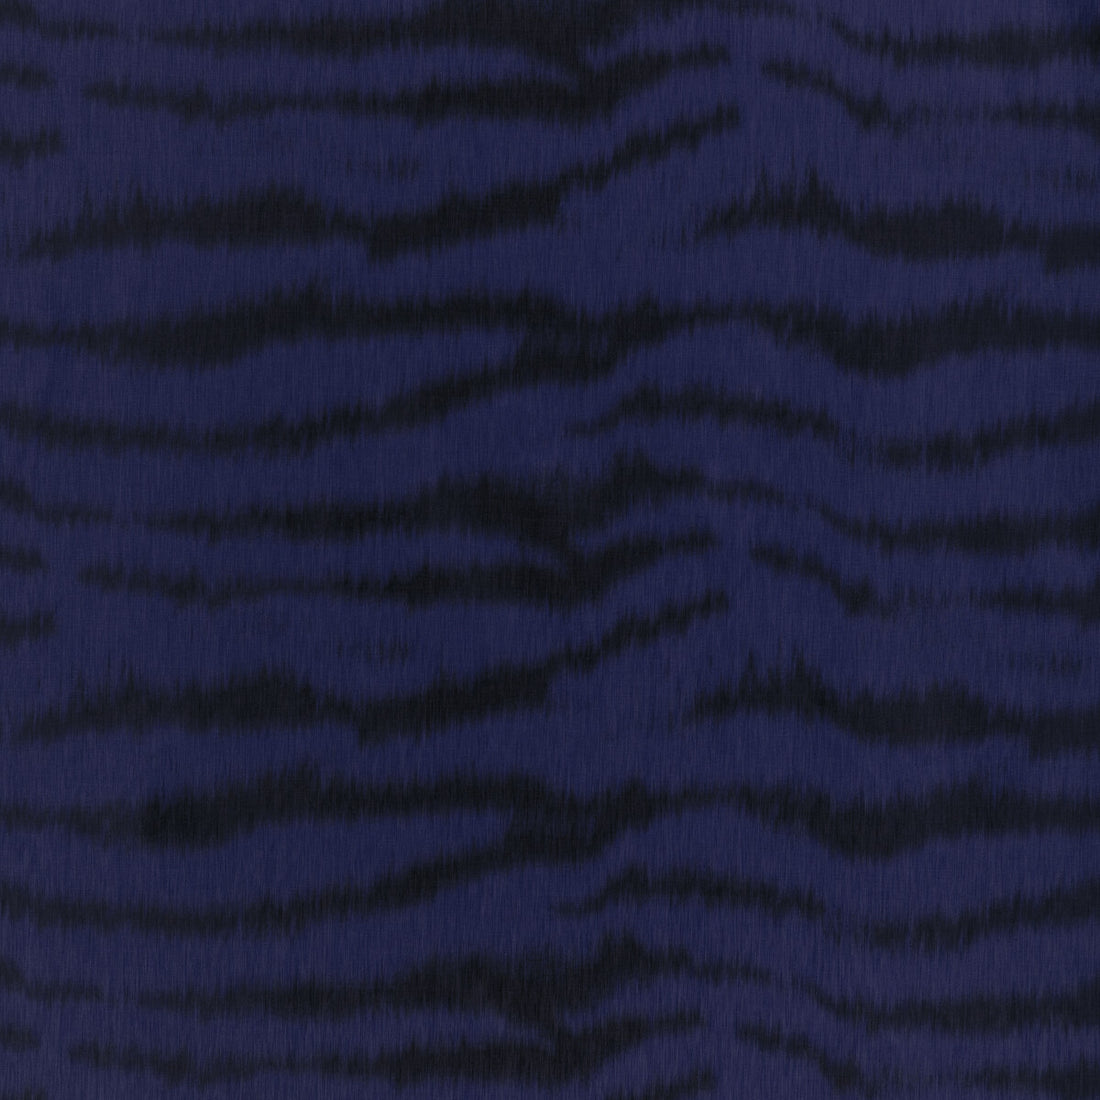 Tigre Warp Print fabric in lapis color - pattern 8023137.5.0 - by Brunschwig &amp; Fils in the Celeste collection